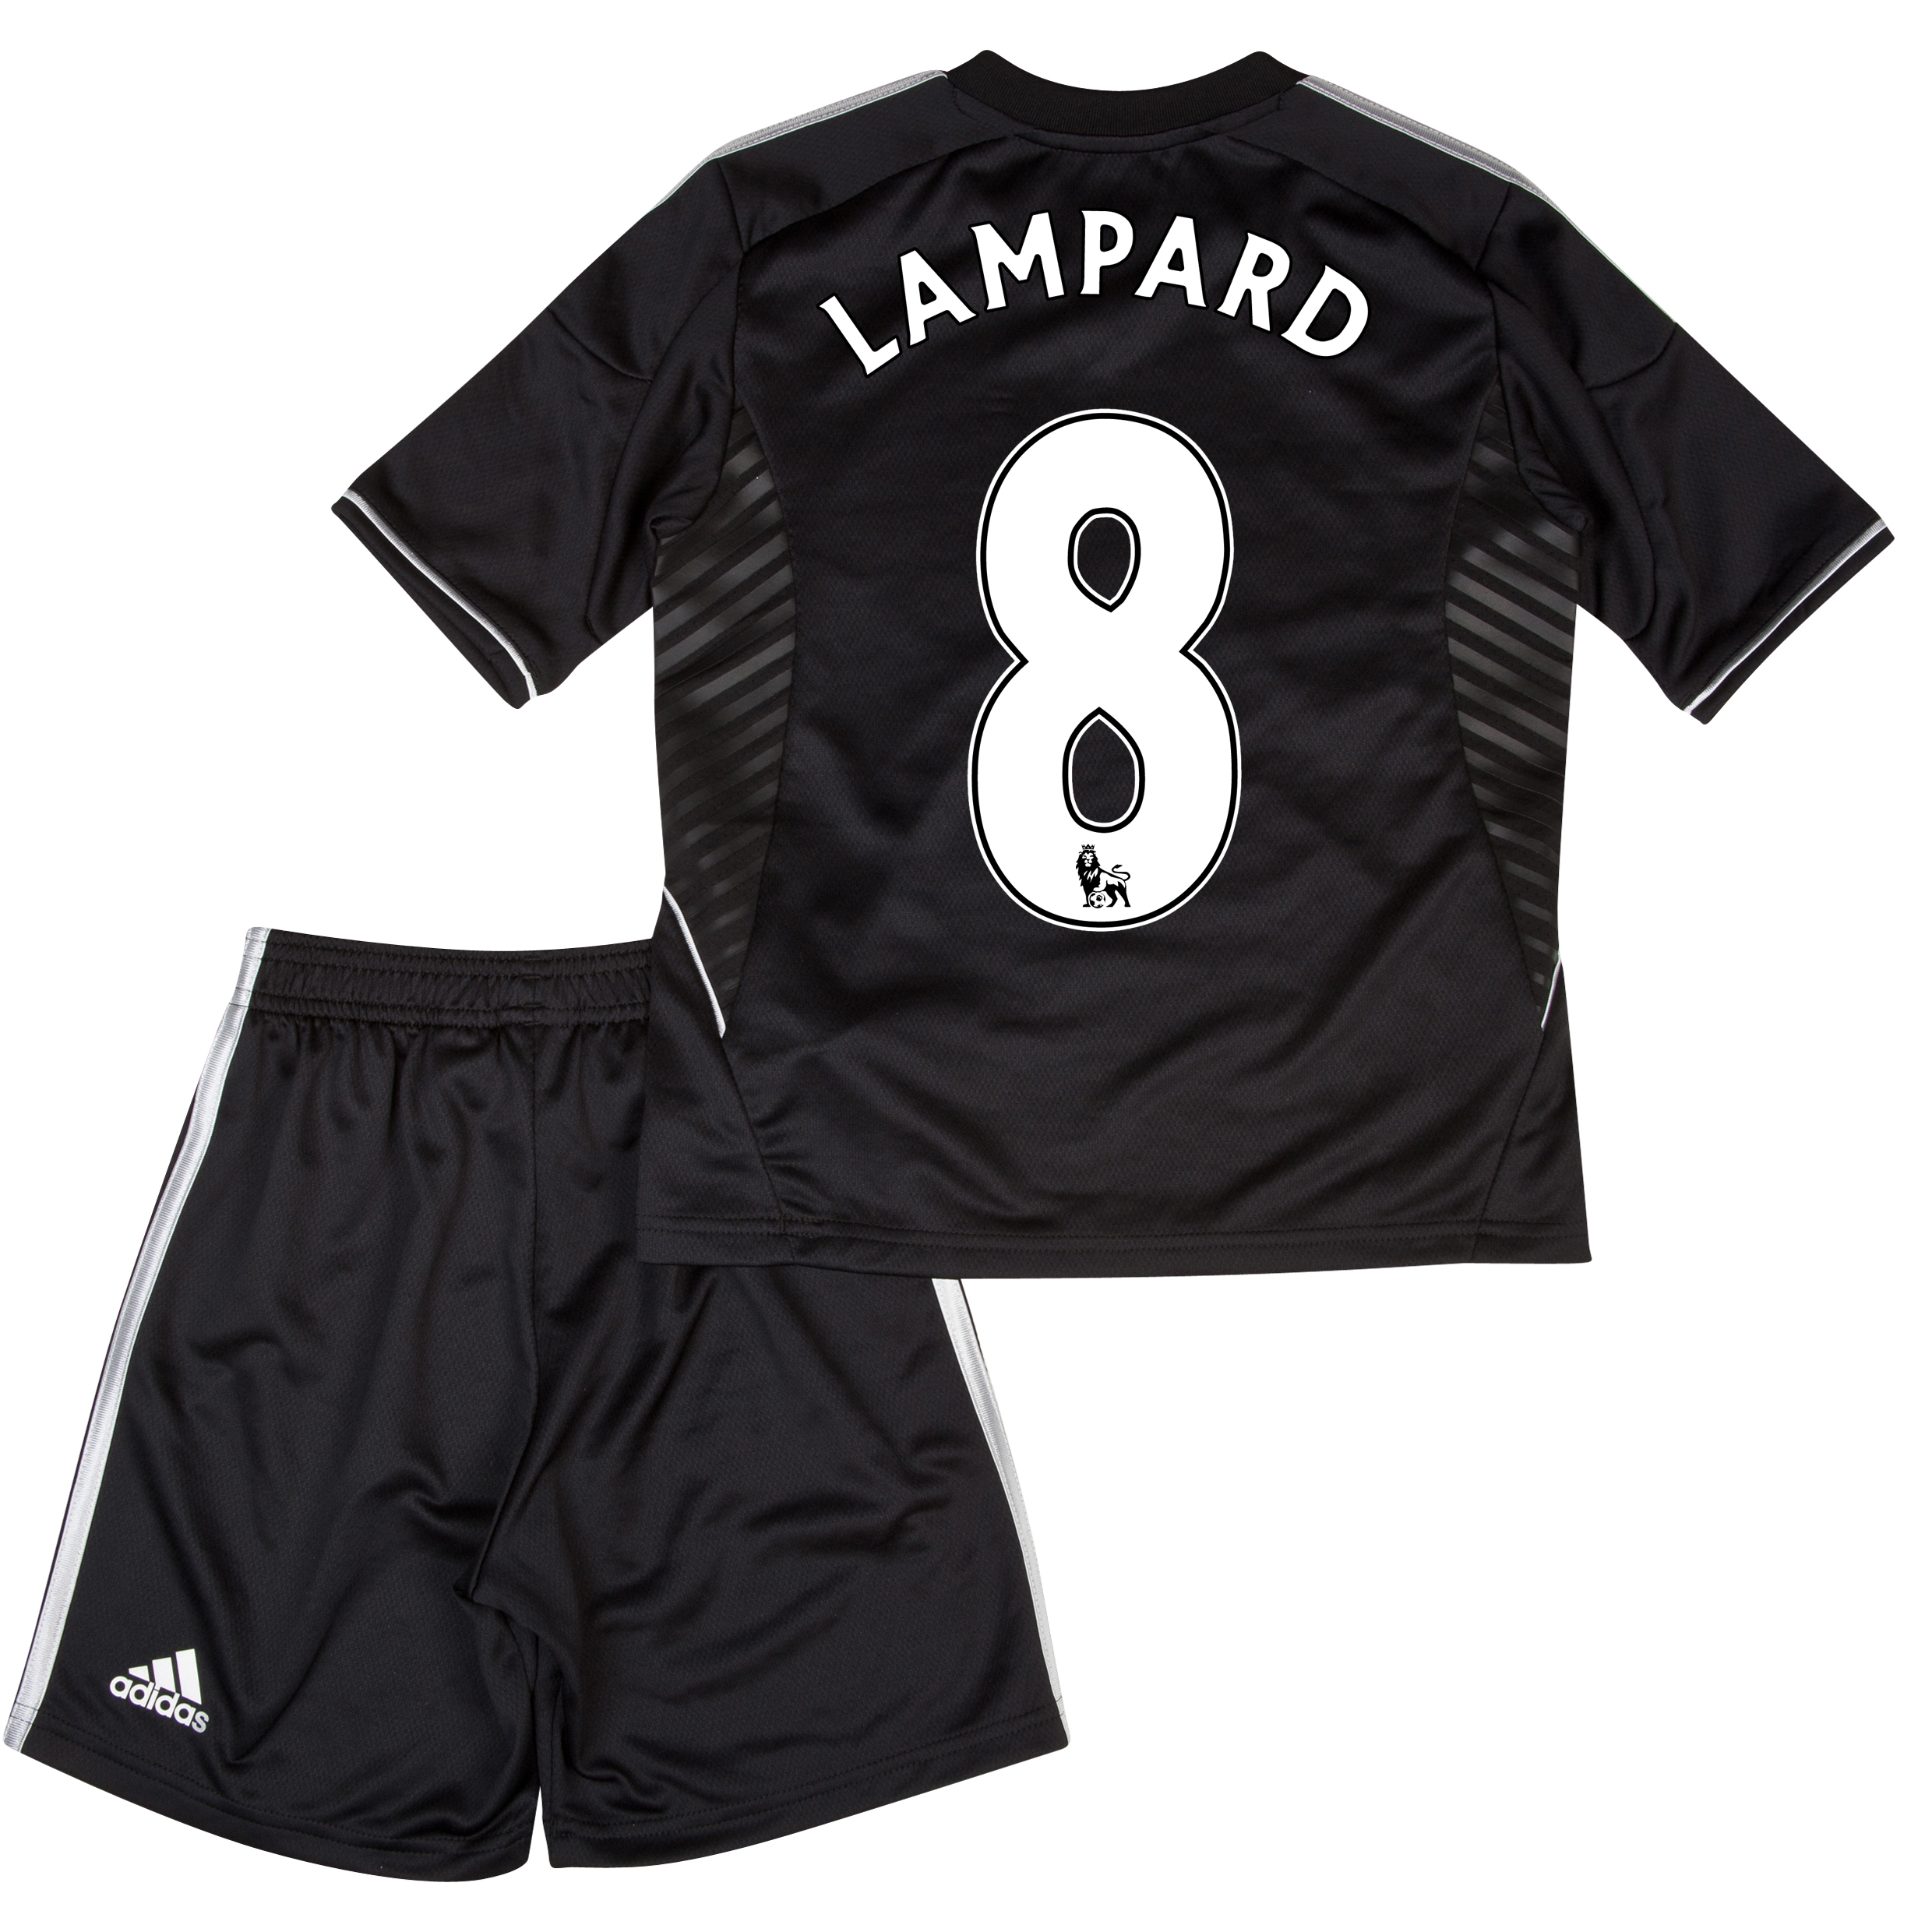 Chelsea Third Mini Kit 2013/14 with Lampard 8 printing